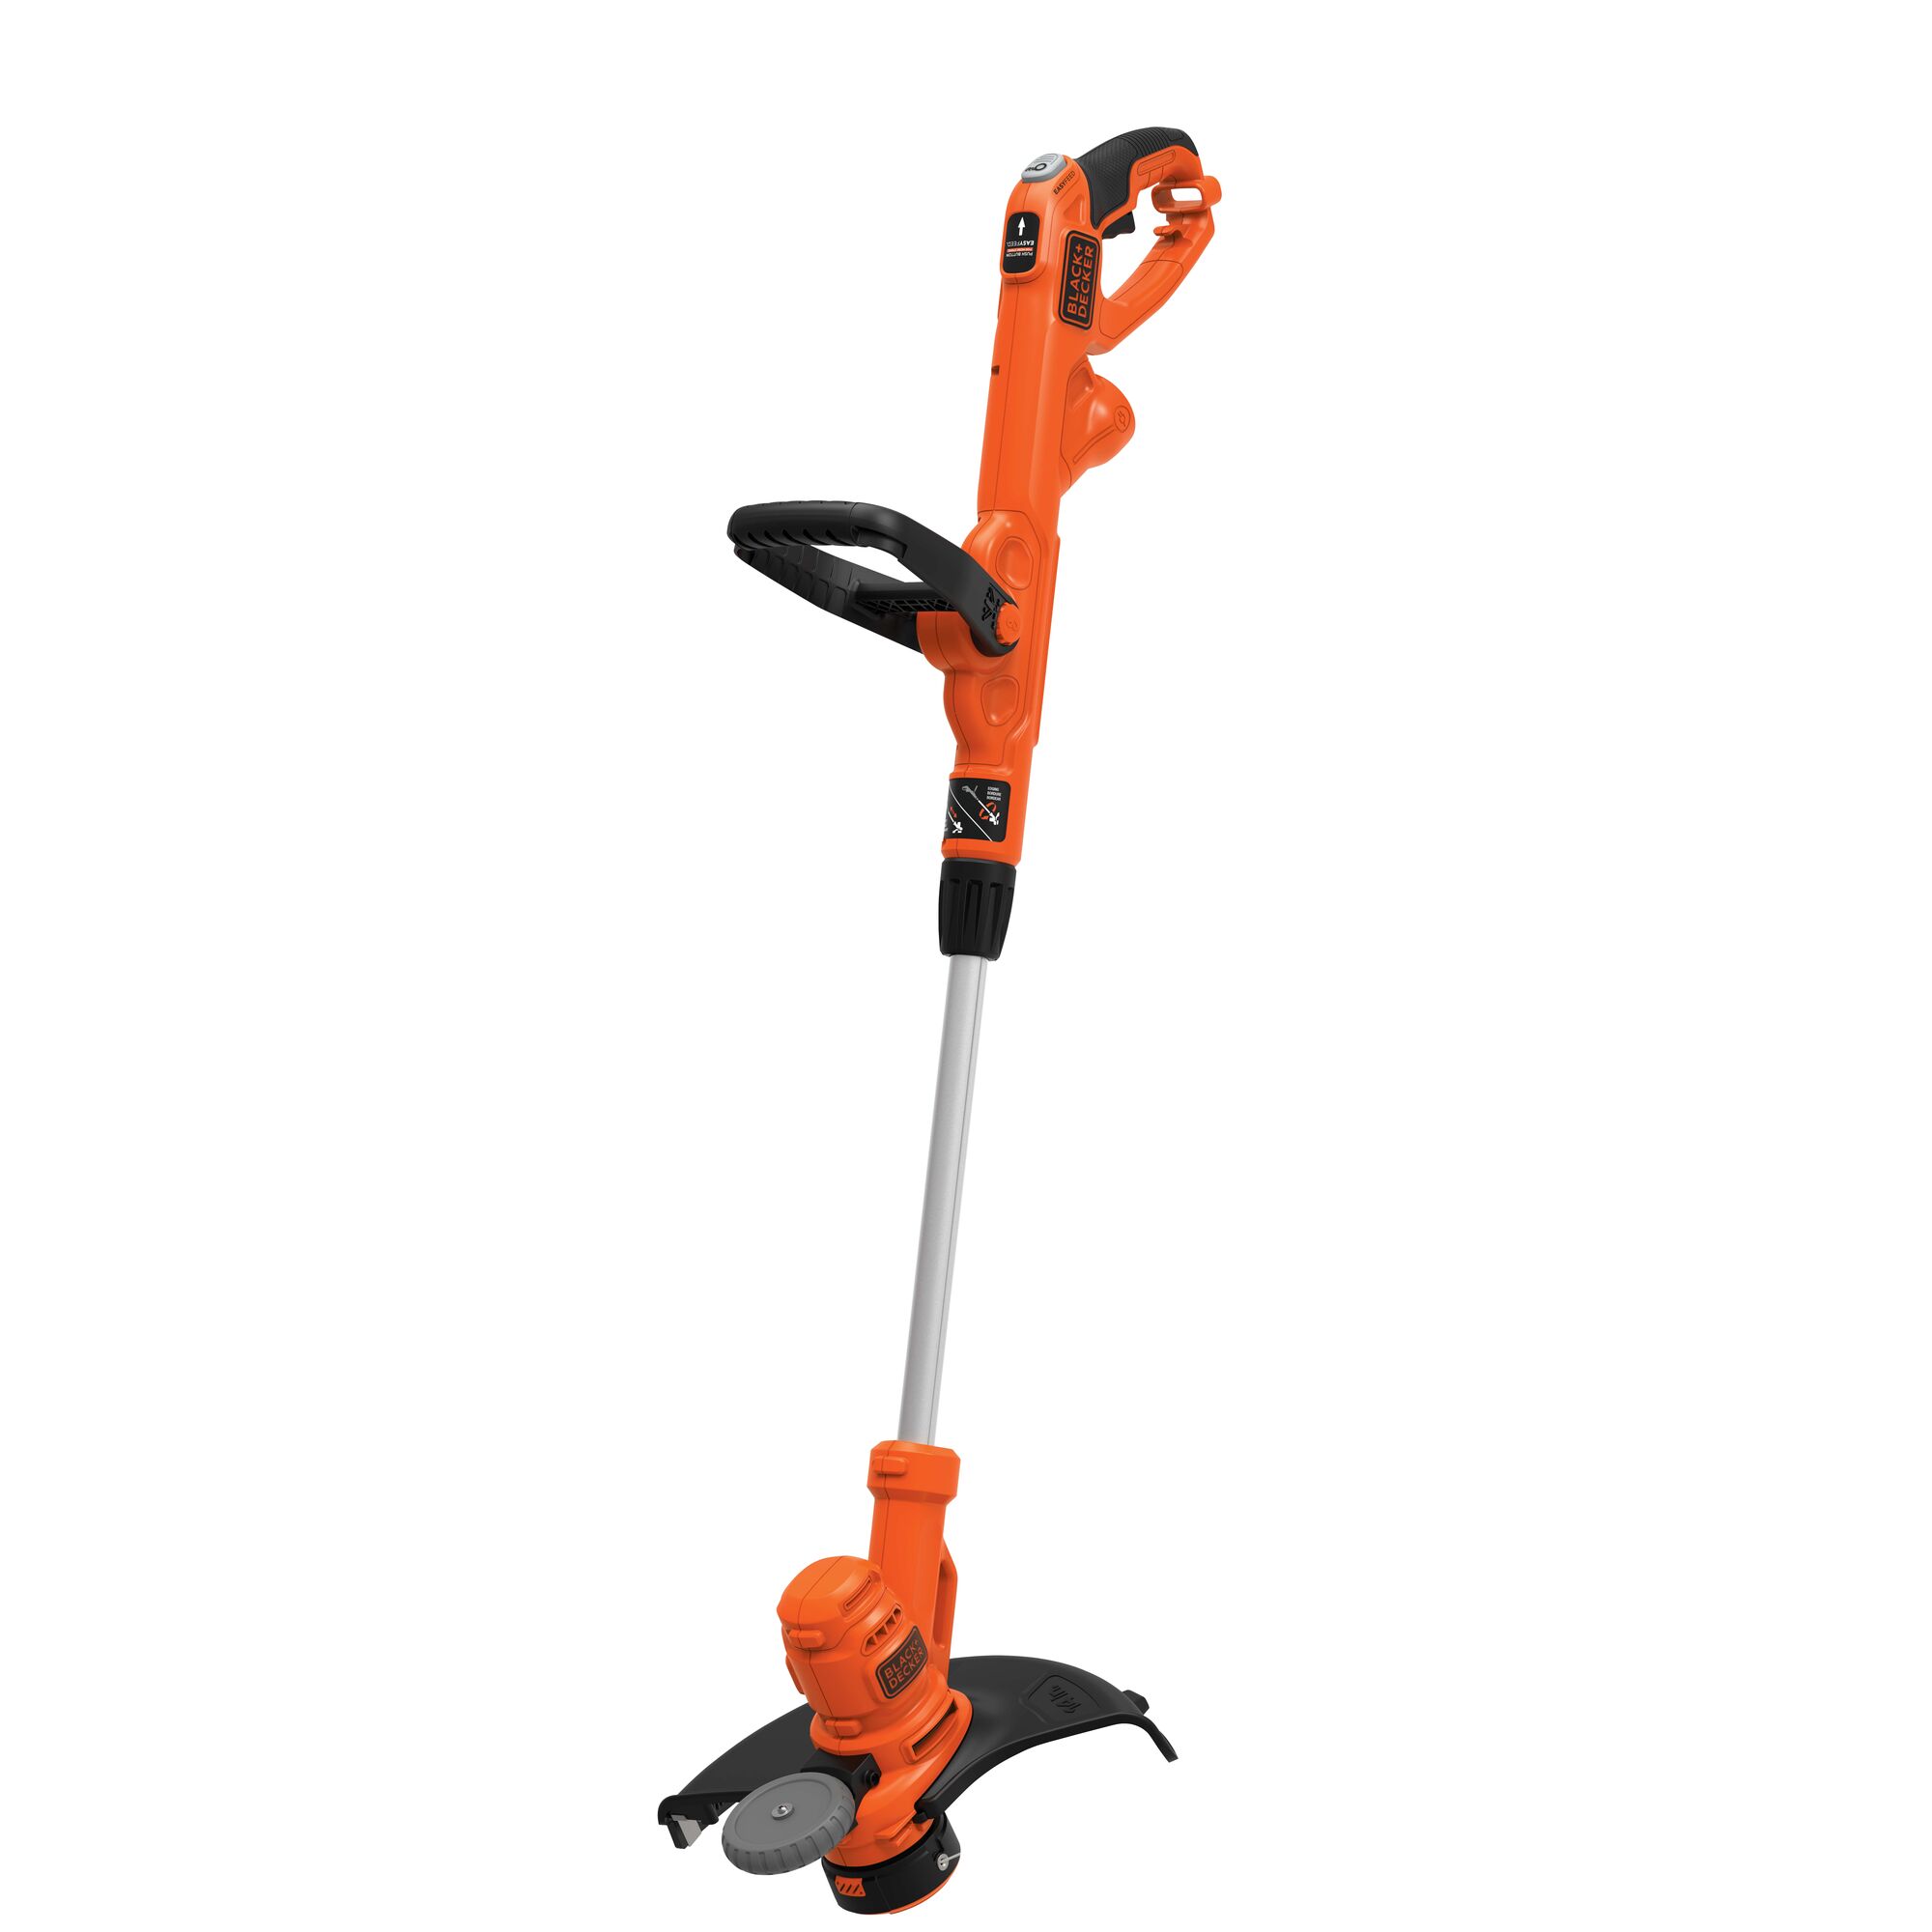 Profile of 6.5 amp 14 inch powercommand electric string trimmer and edger with easyfeed.